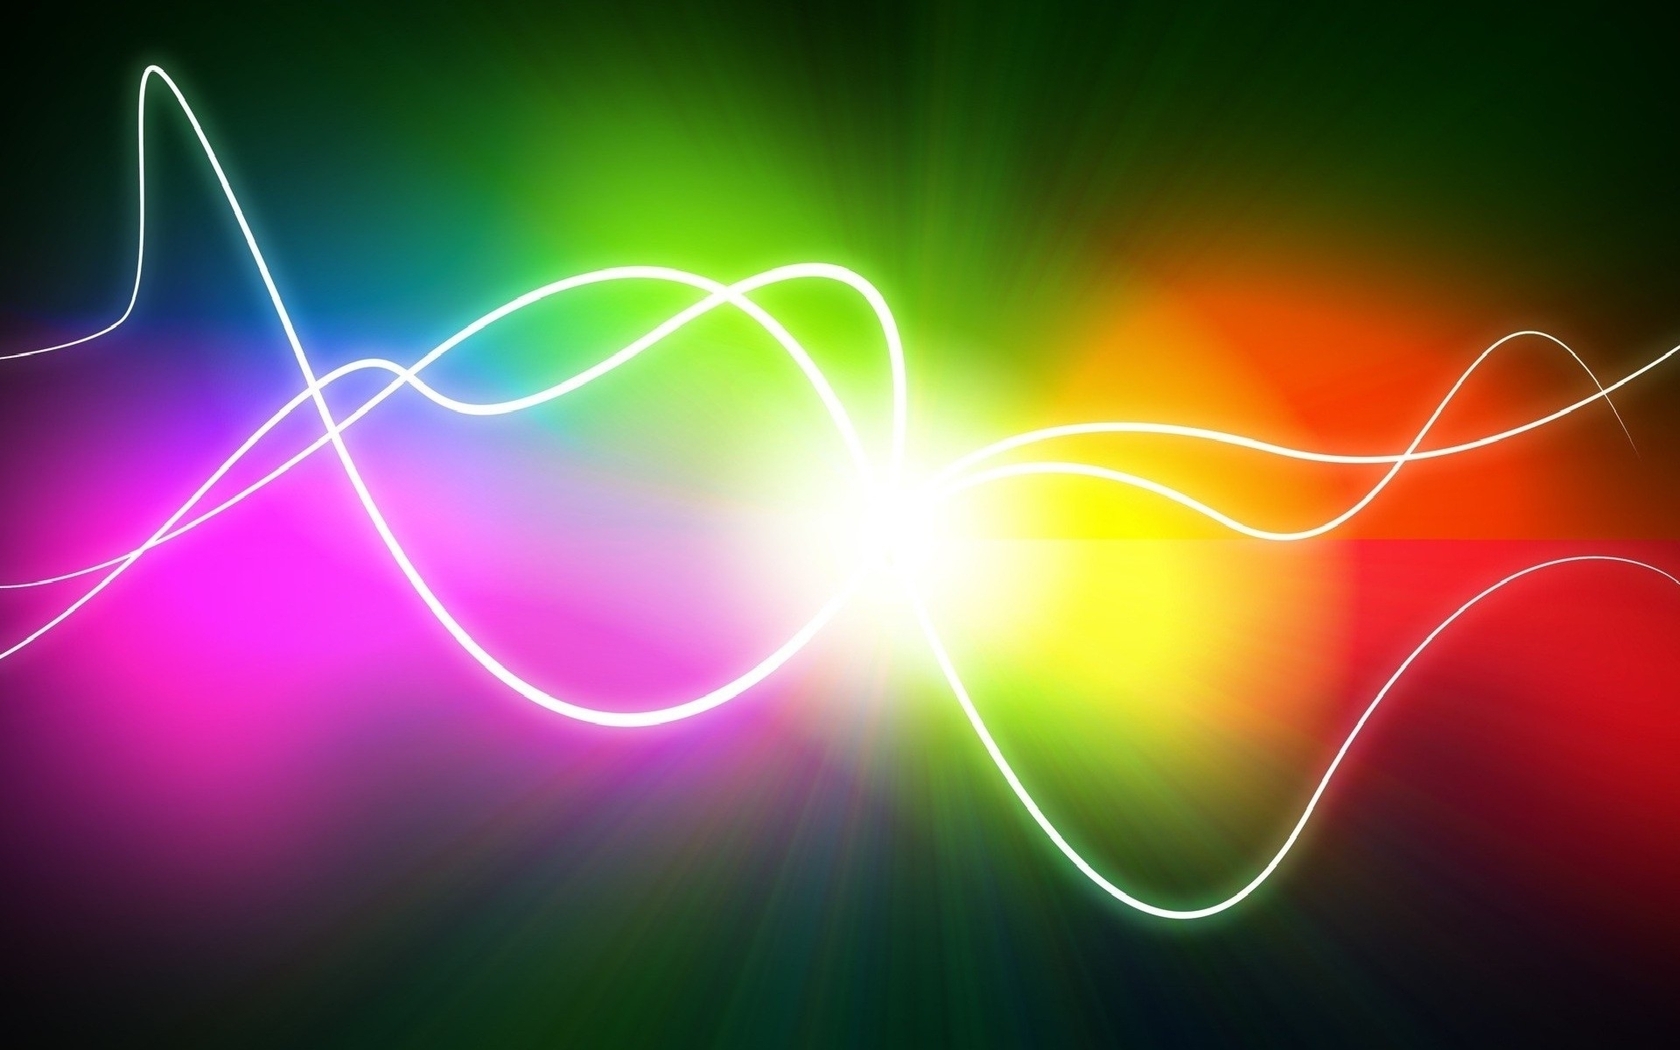 Image: Rays, waves, light, color, spectrum